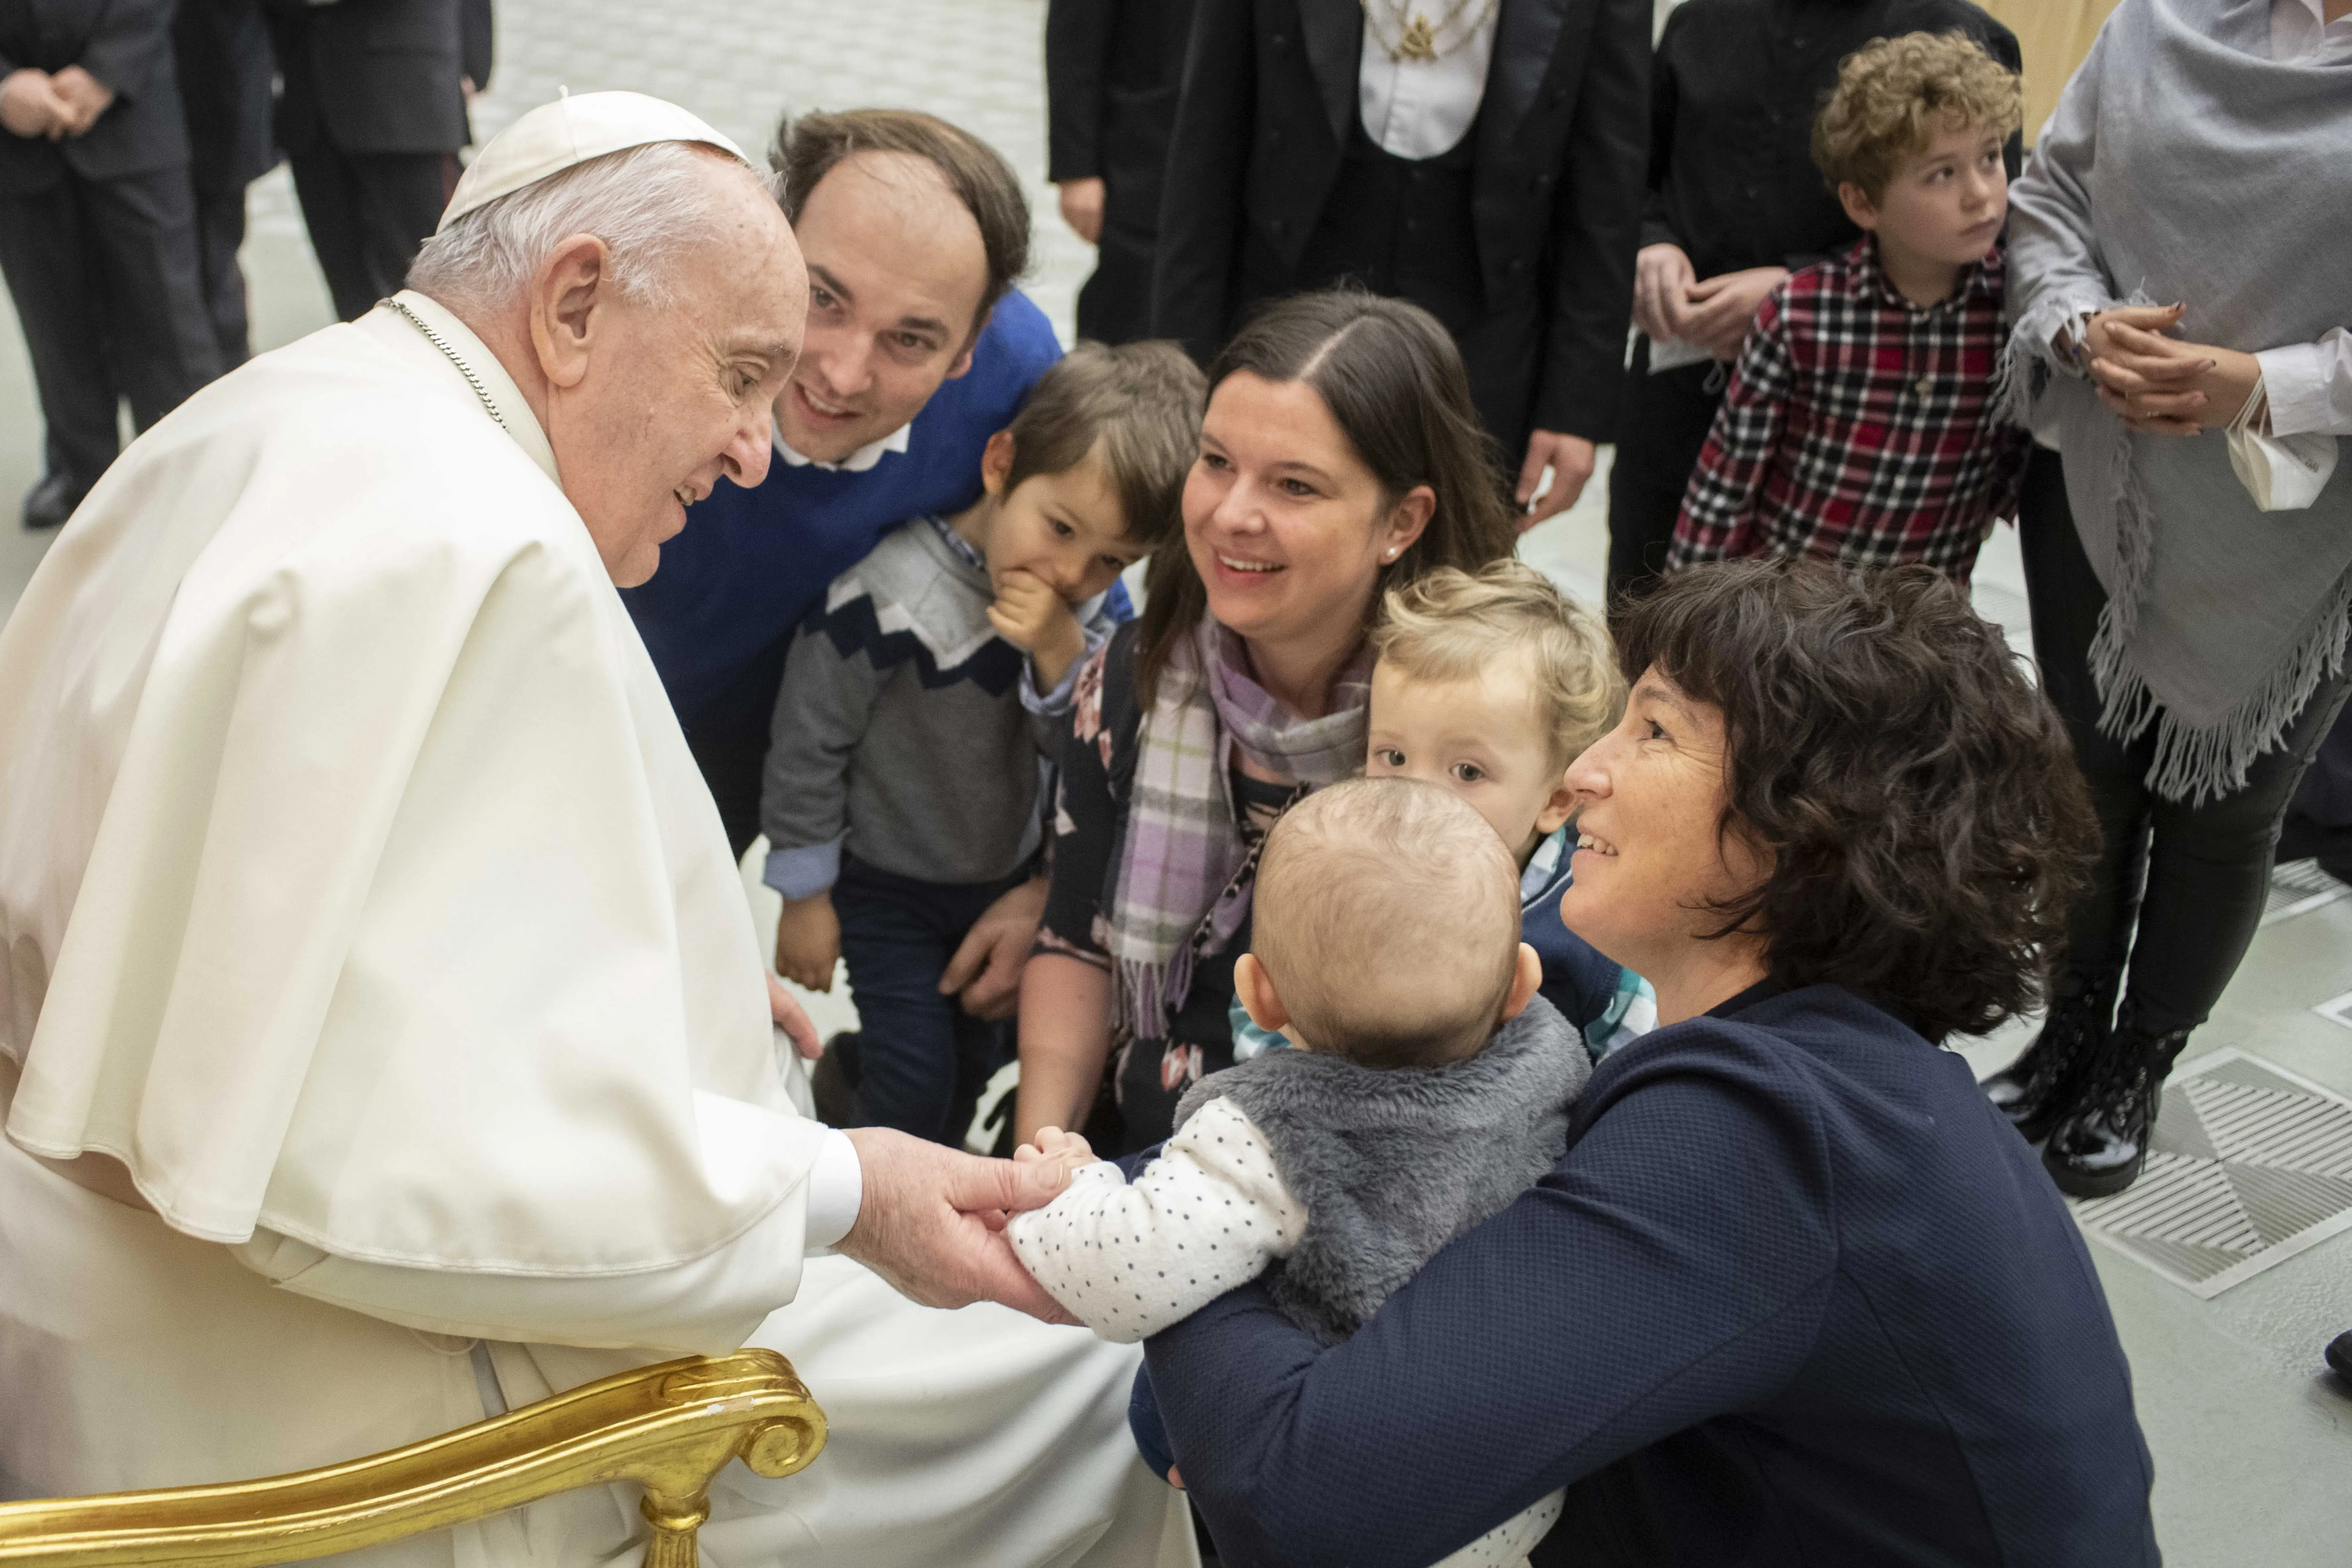 Pope Francis greets families after the general audience on Feb. 2, 2022. Vatican Media